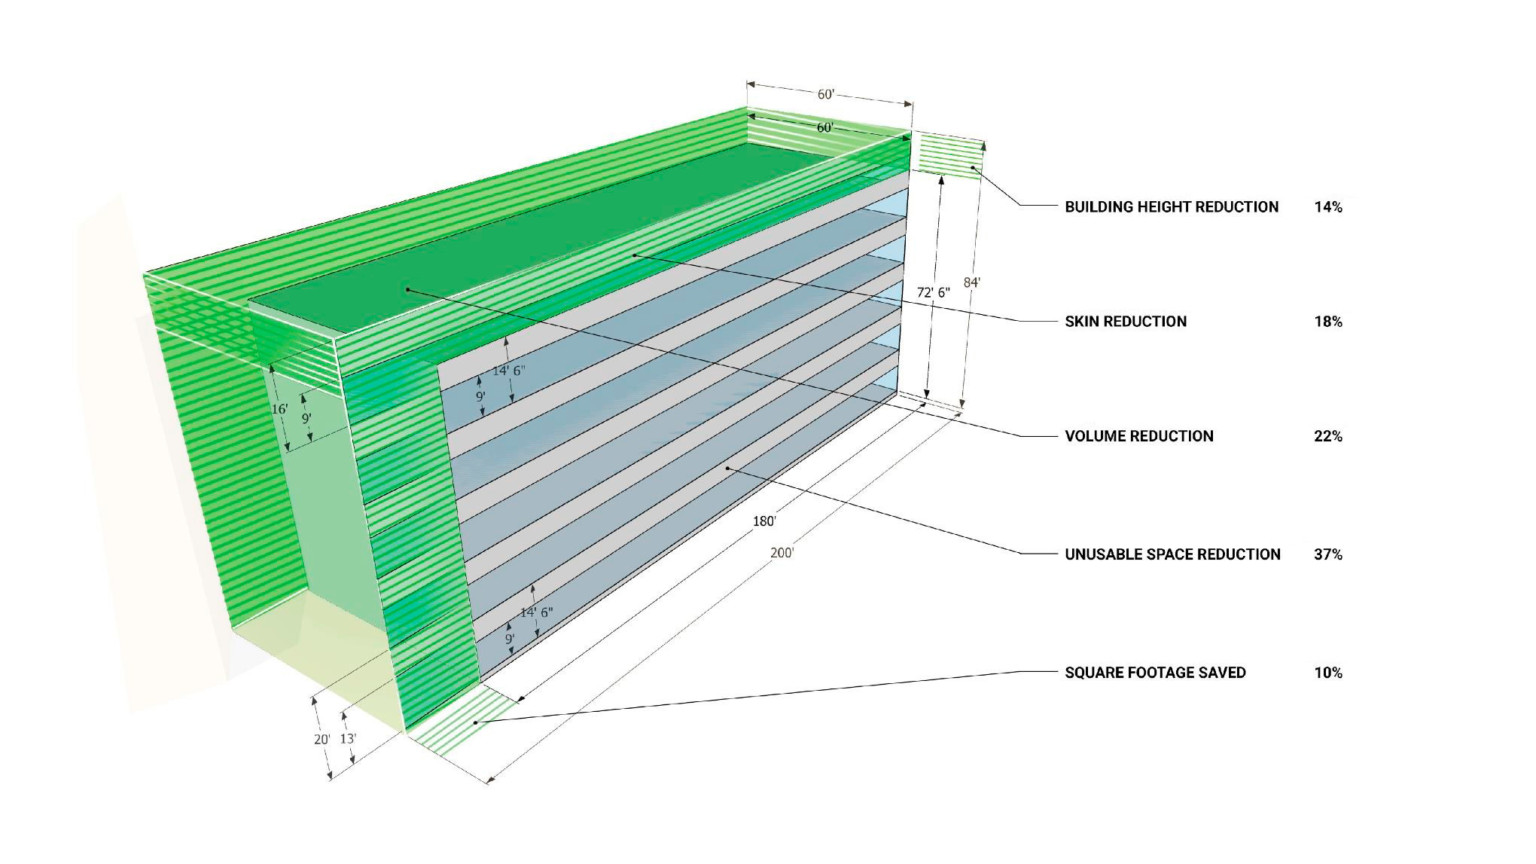 Graphic of building showing reduction of footprint